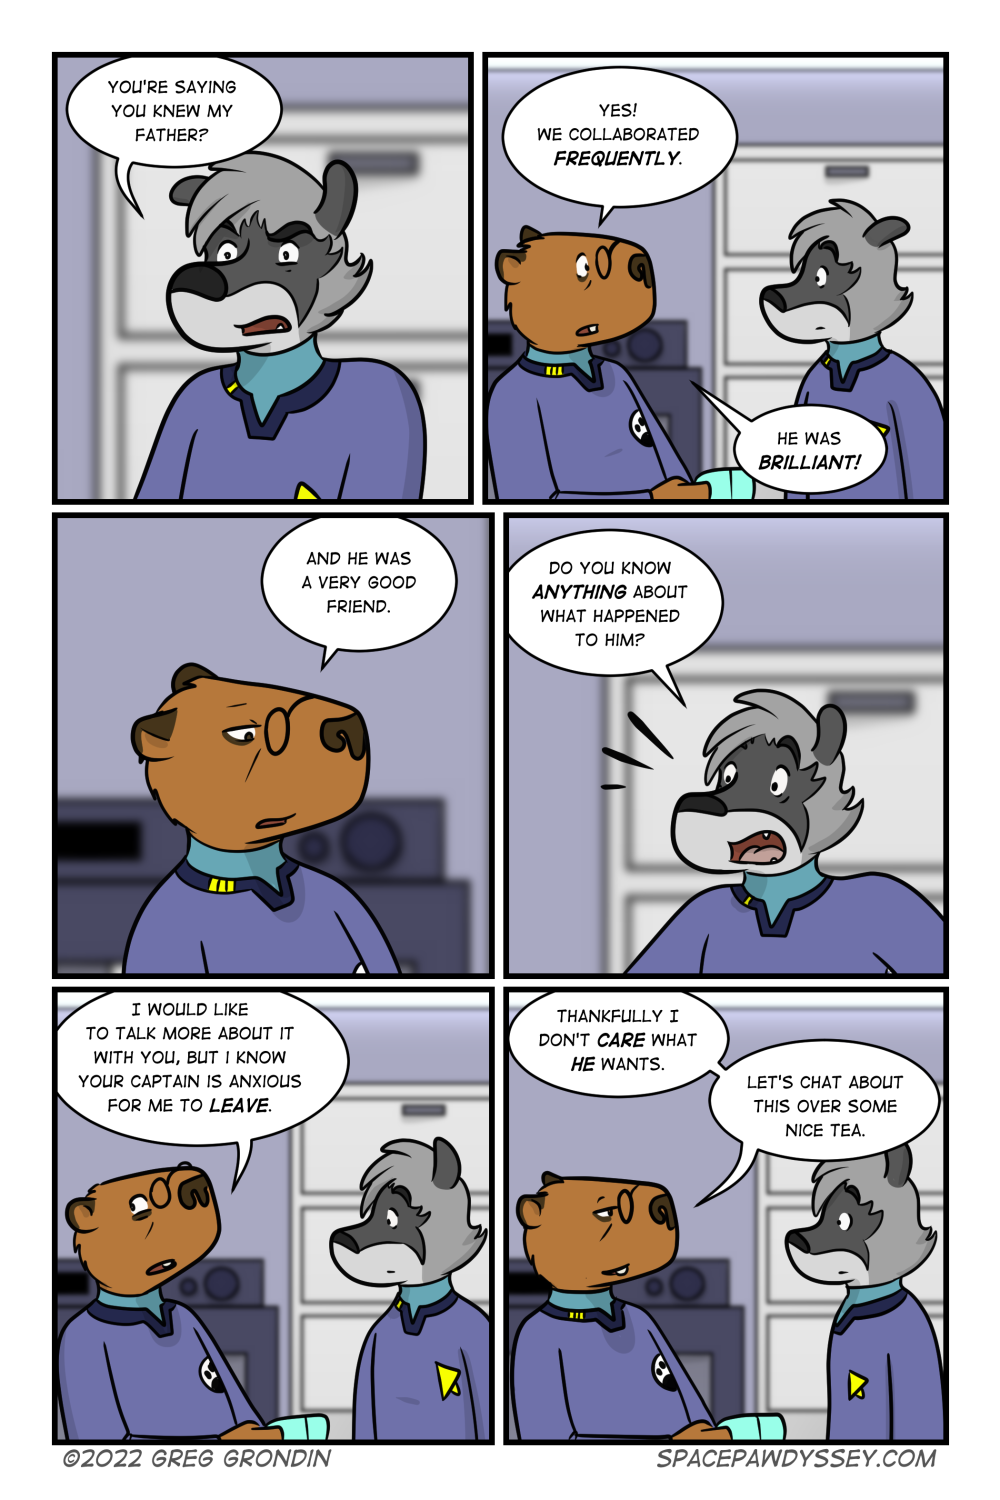 Space Pawdyssey #531